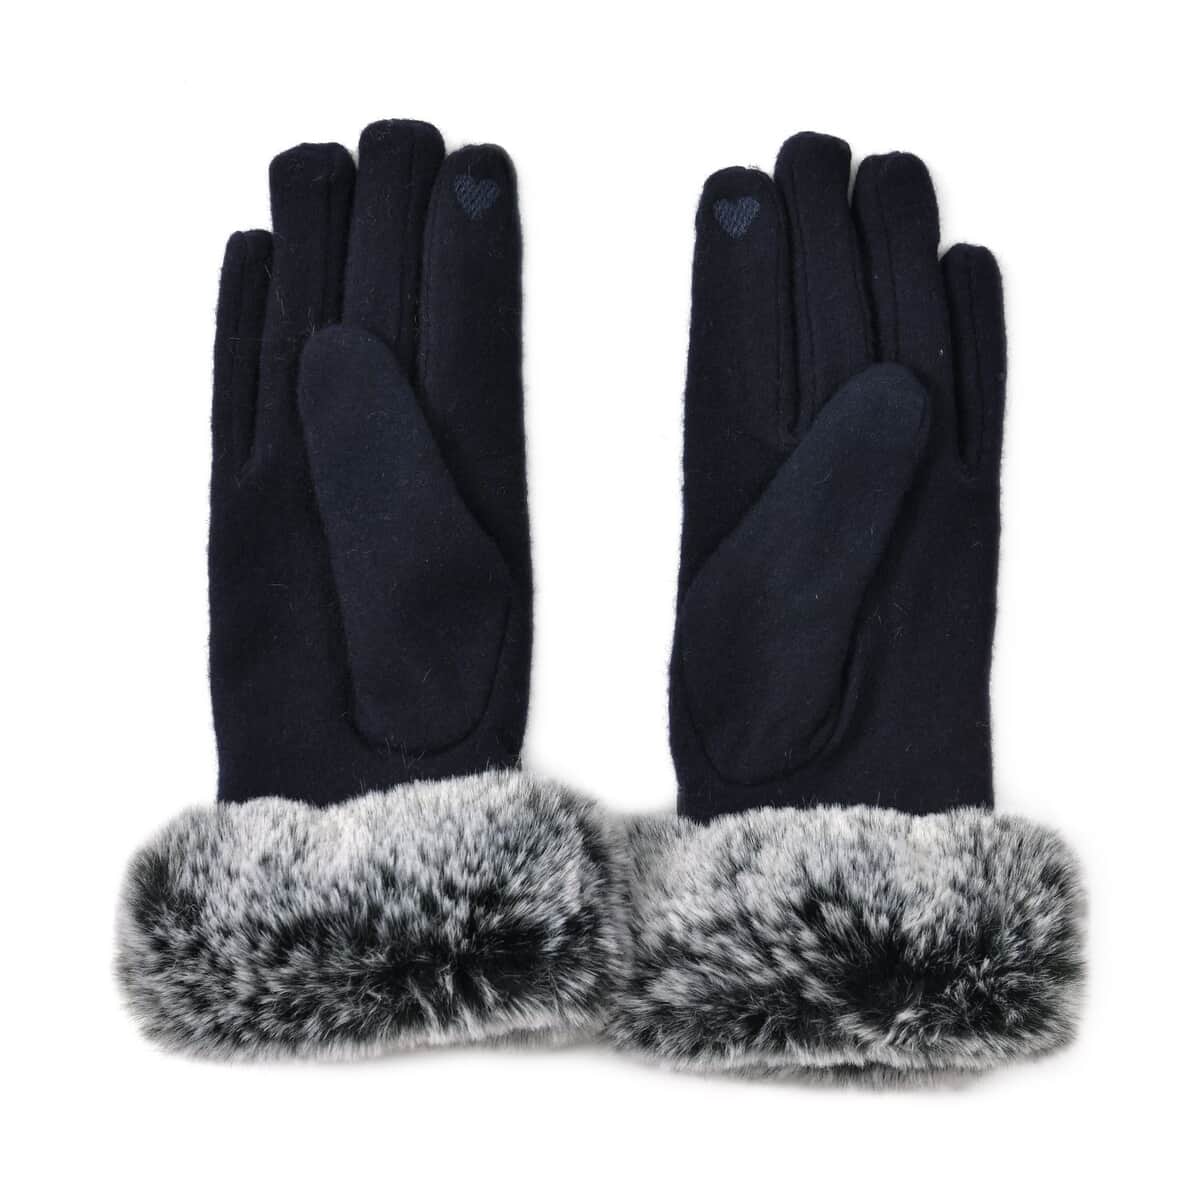 Navy cashmere gloves with faux fur with Touch screen function (9.05"x3.54") image number 6